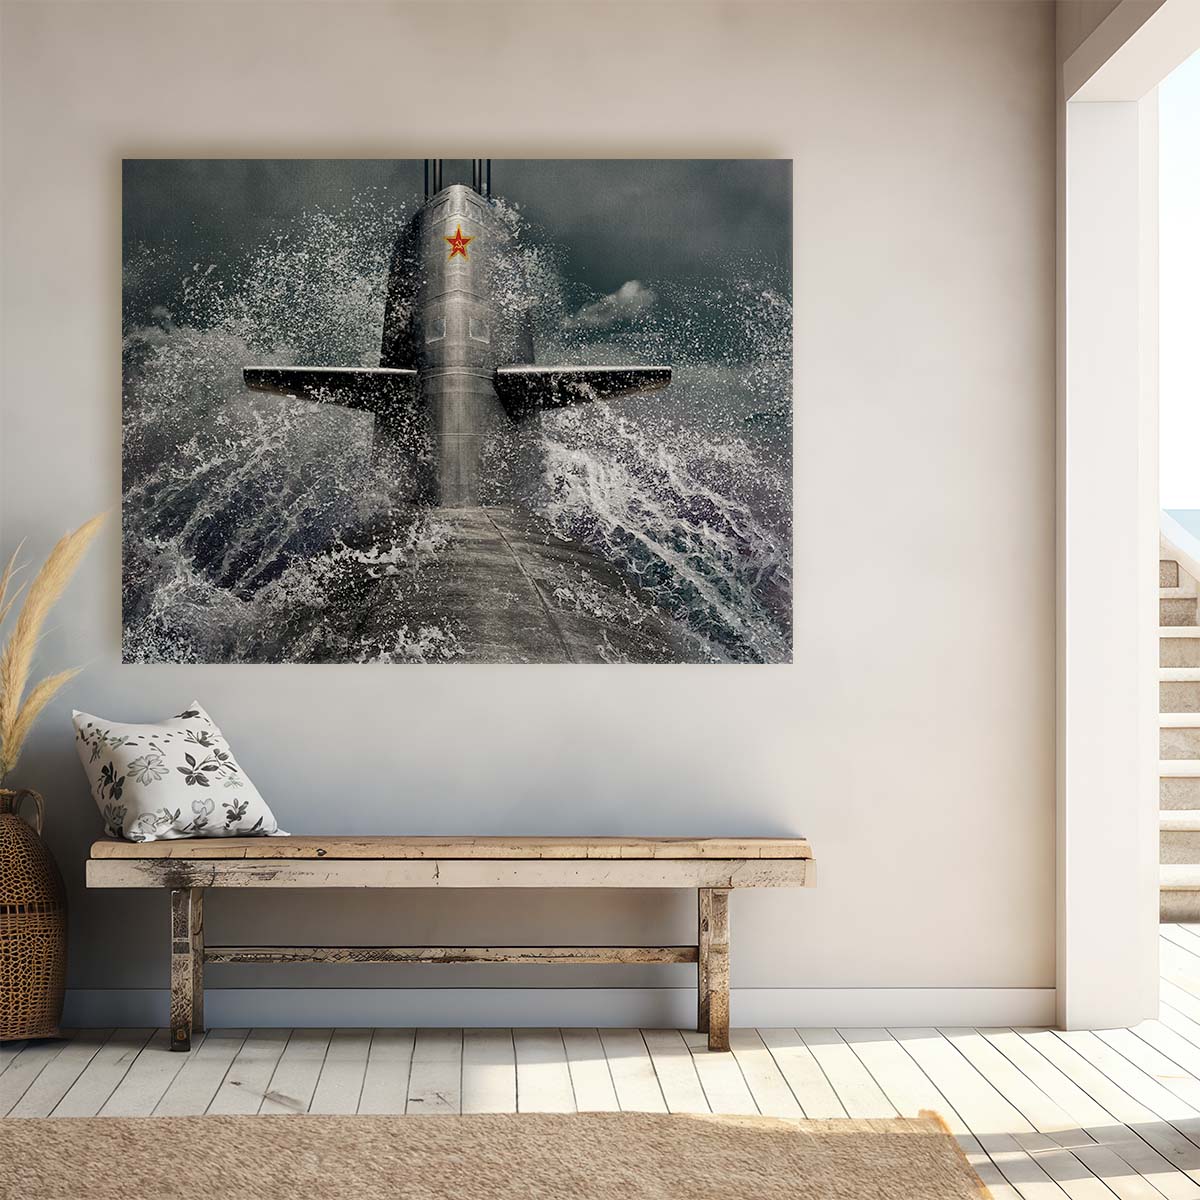 Soviet Submarine Emergence Dramatic Naval Wall Art by Luxuriance Designs. Made in USA.